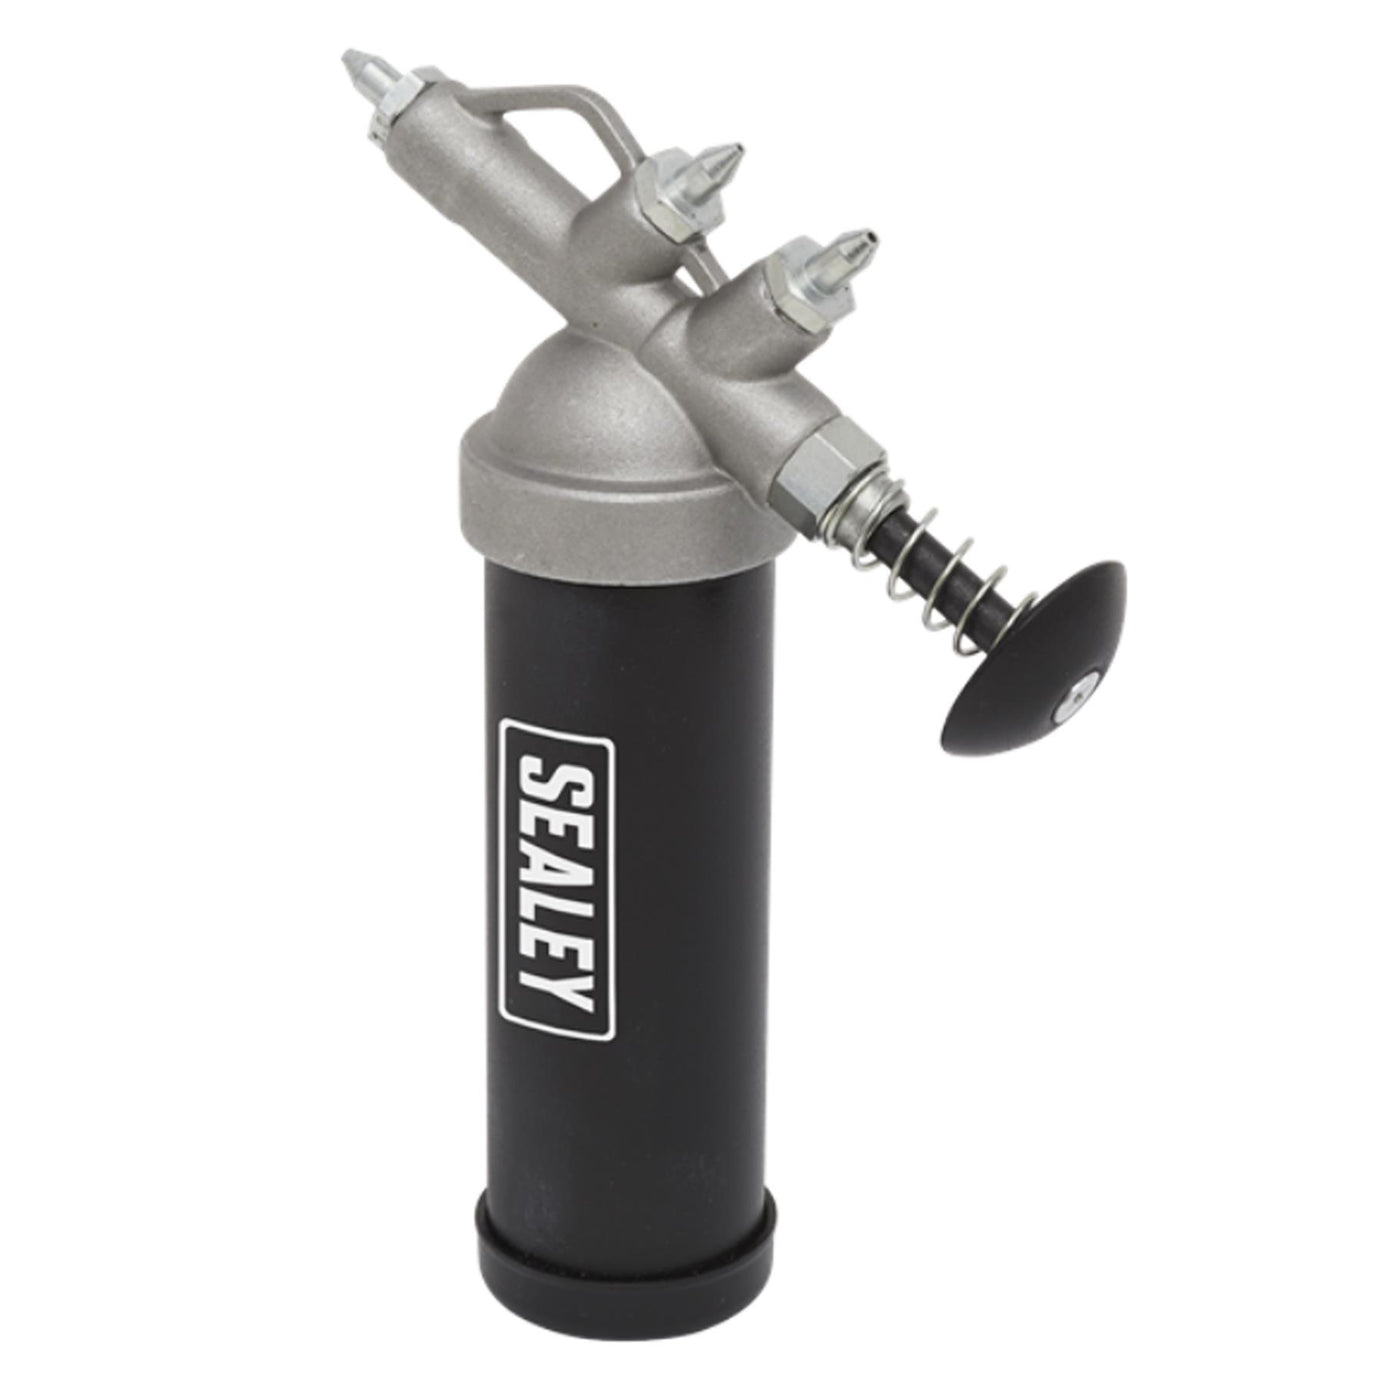 Sealey Push Type Mini Grease Gun With 0.7mm, 1.0mm and 1.4mm Nozzles